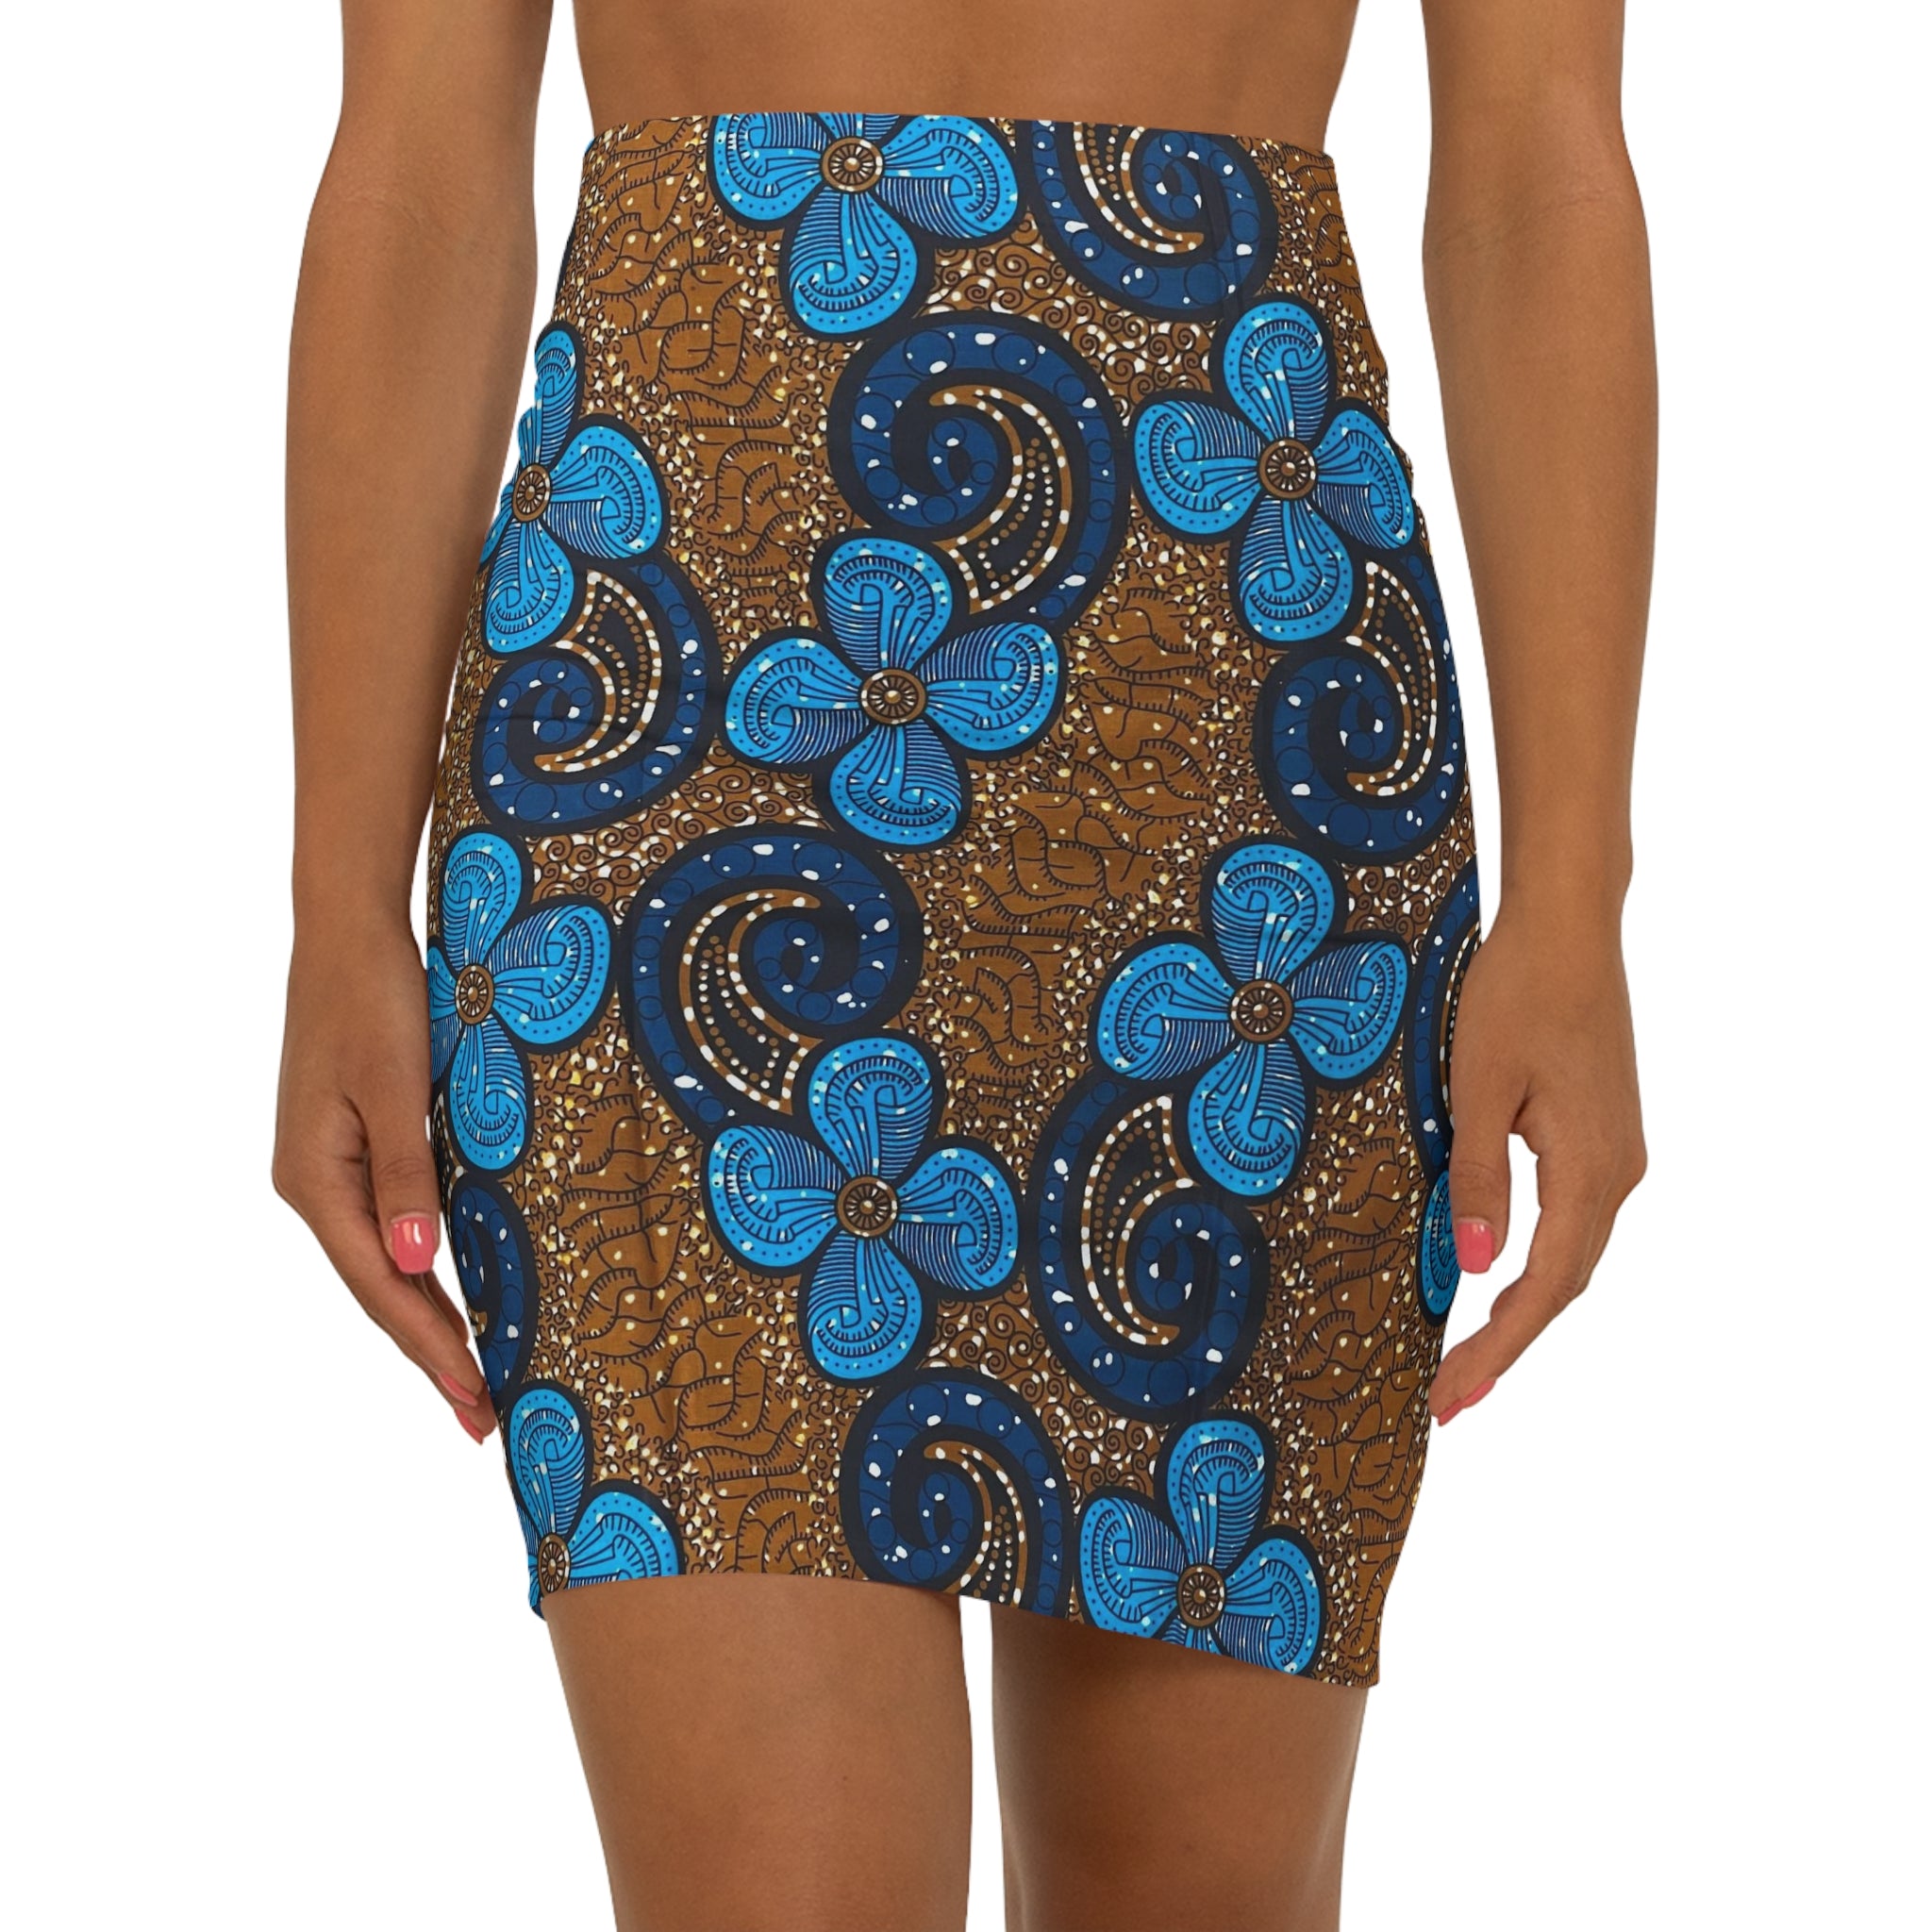 Dance in Denim African Print Fabric - 100% Cotton, 44" Wide, Chic and Versatile